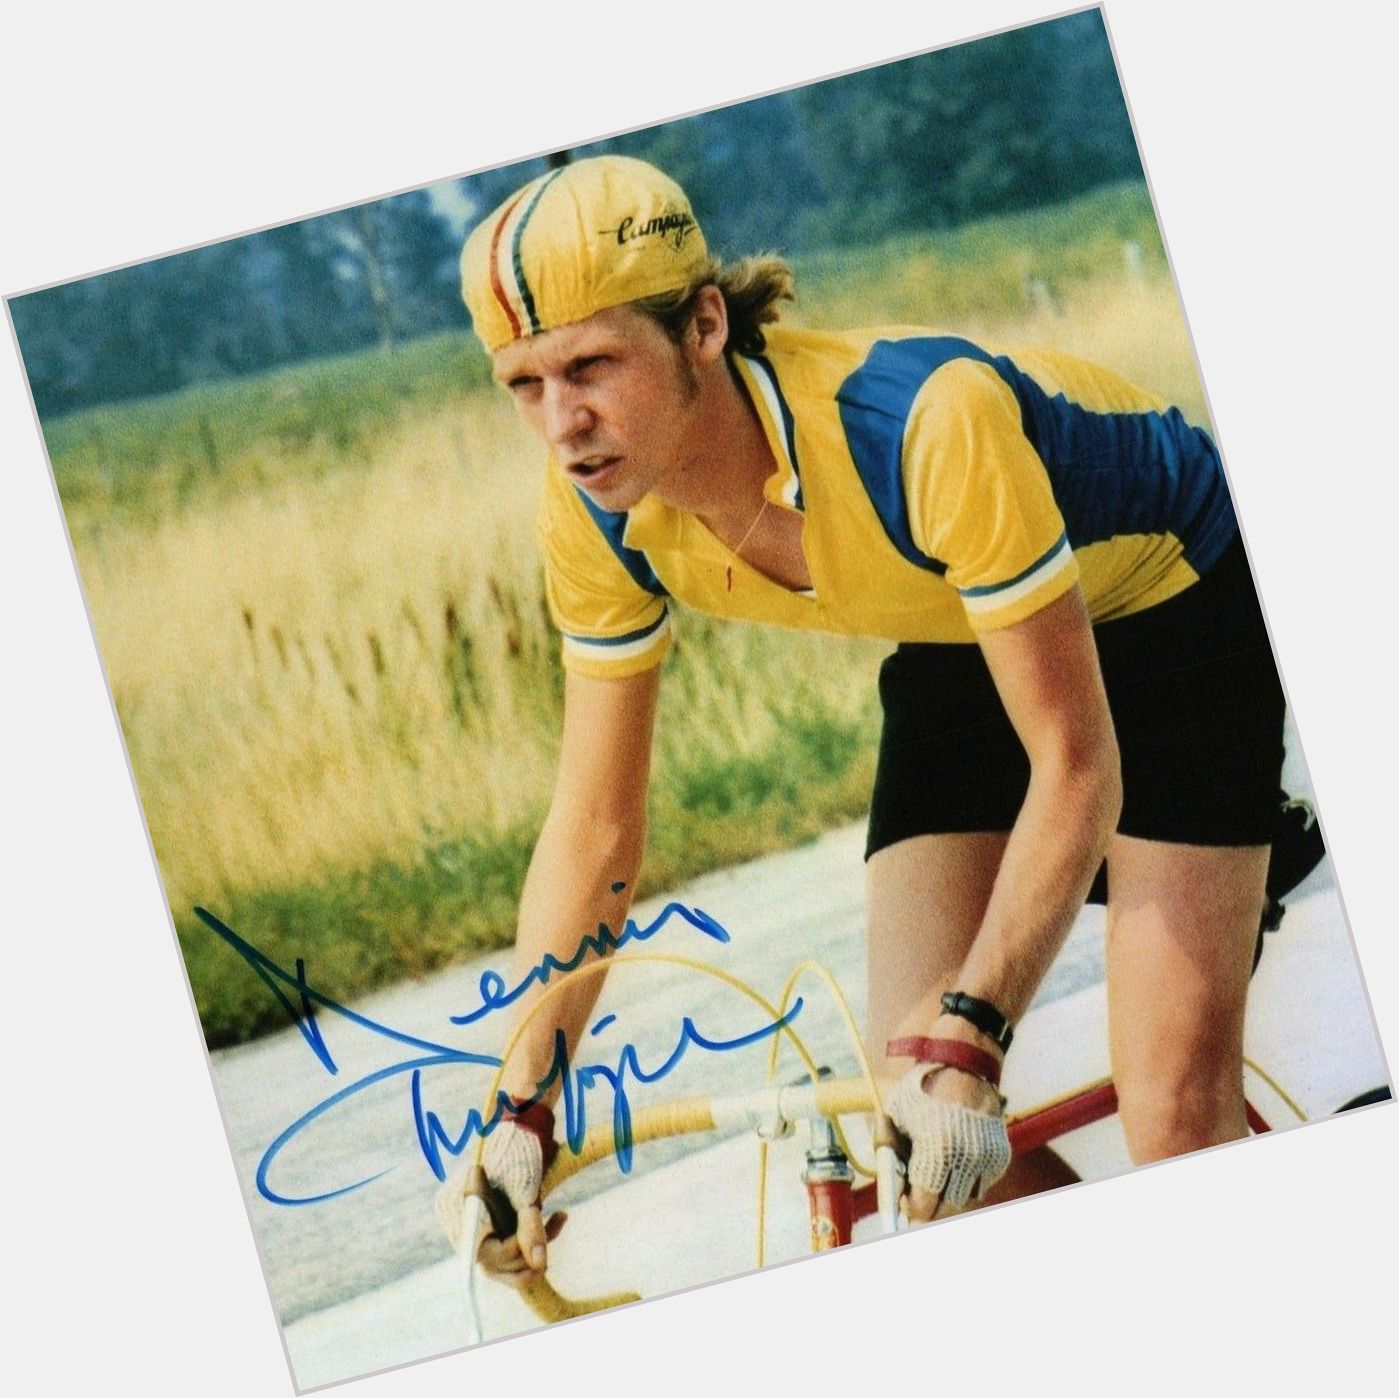 Wishing a happy birthday to Dennis Christopher, star of Breaking Away, Fade to Black, and more! 